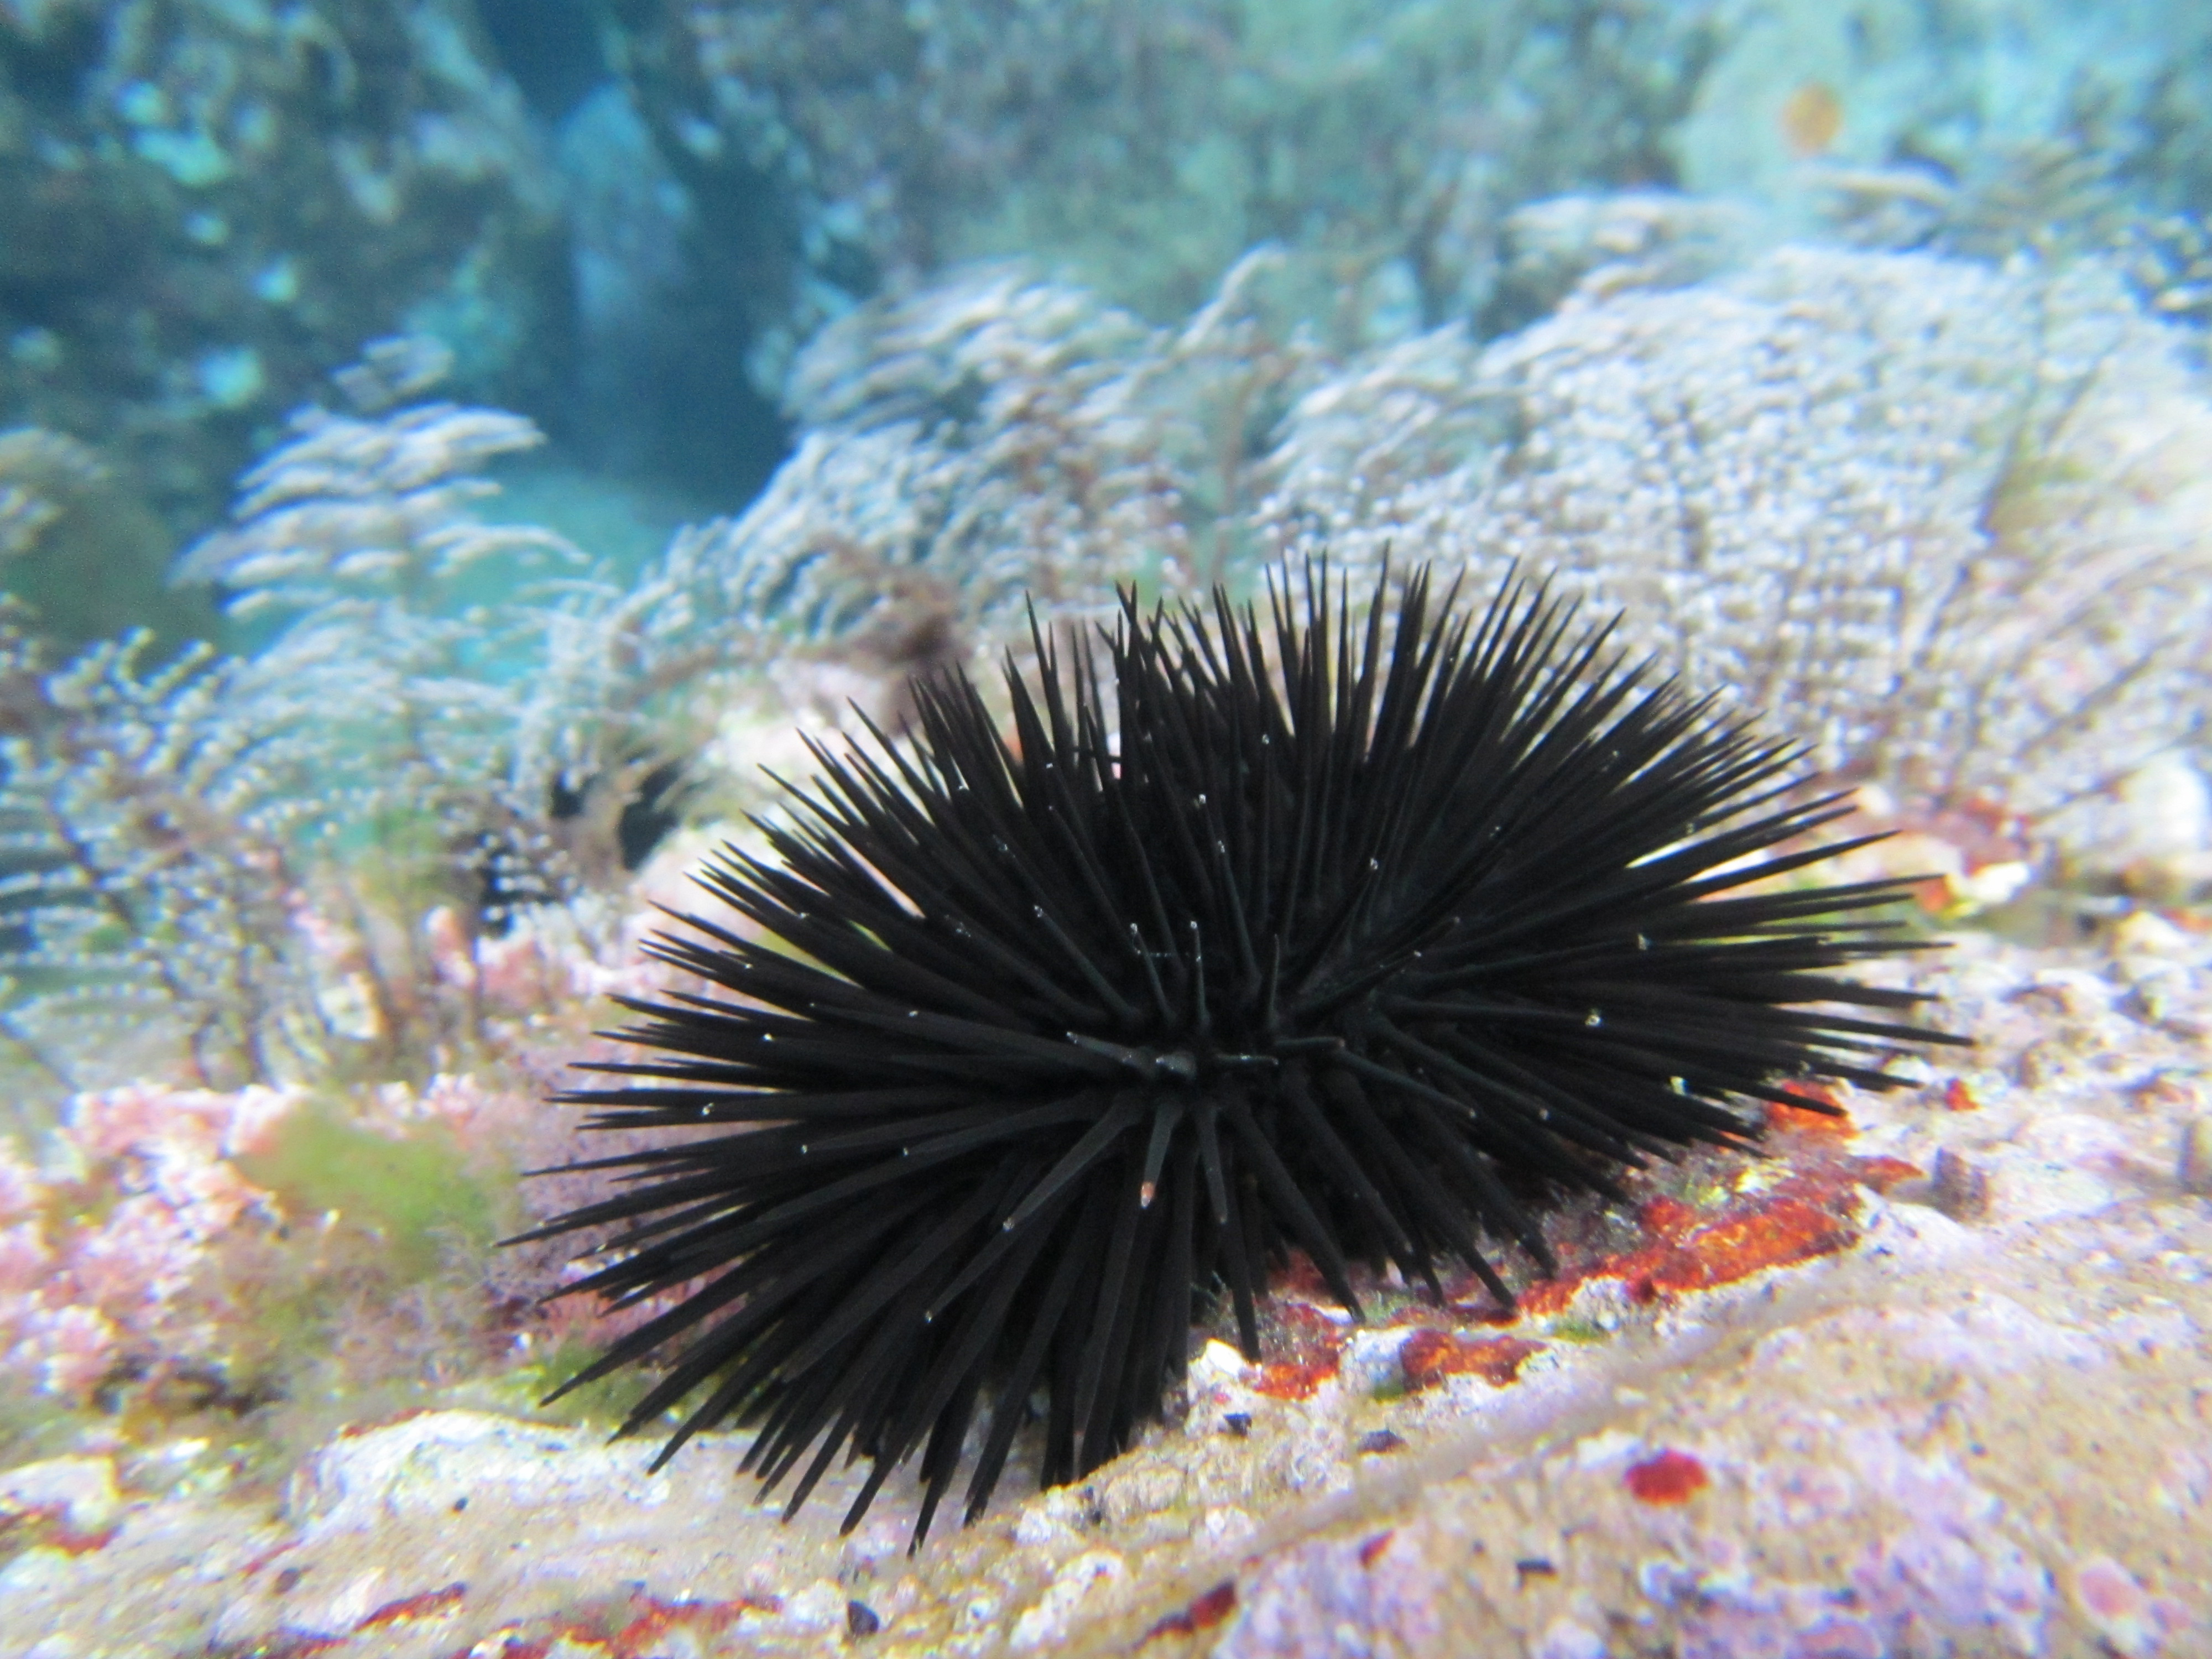 College of Sciences NewsUCF Team Studied Sea Urchins to Restore ...